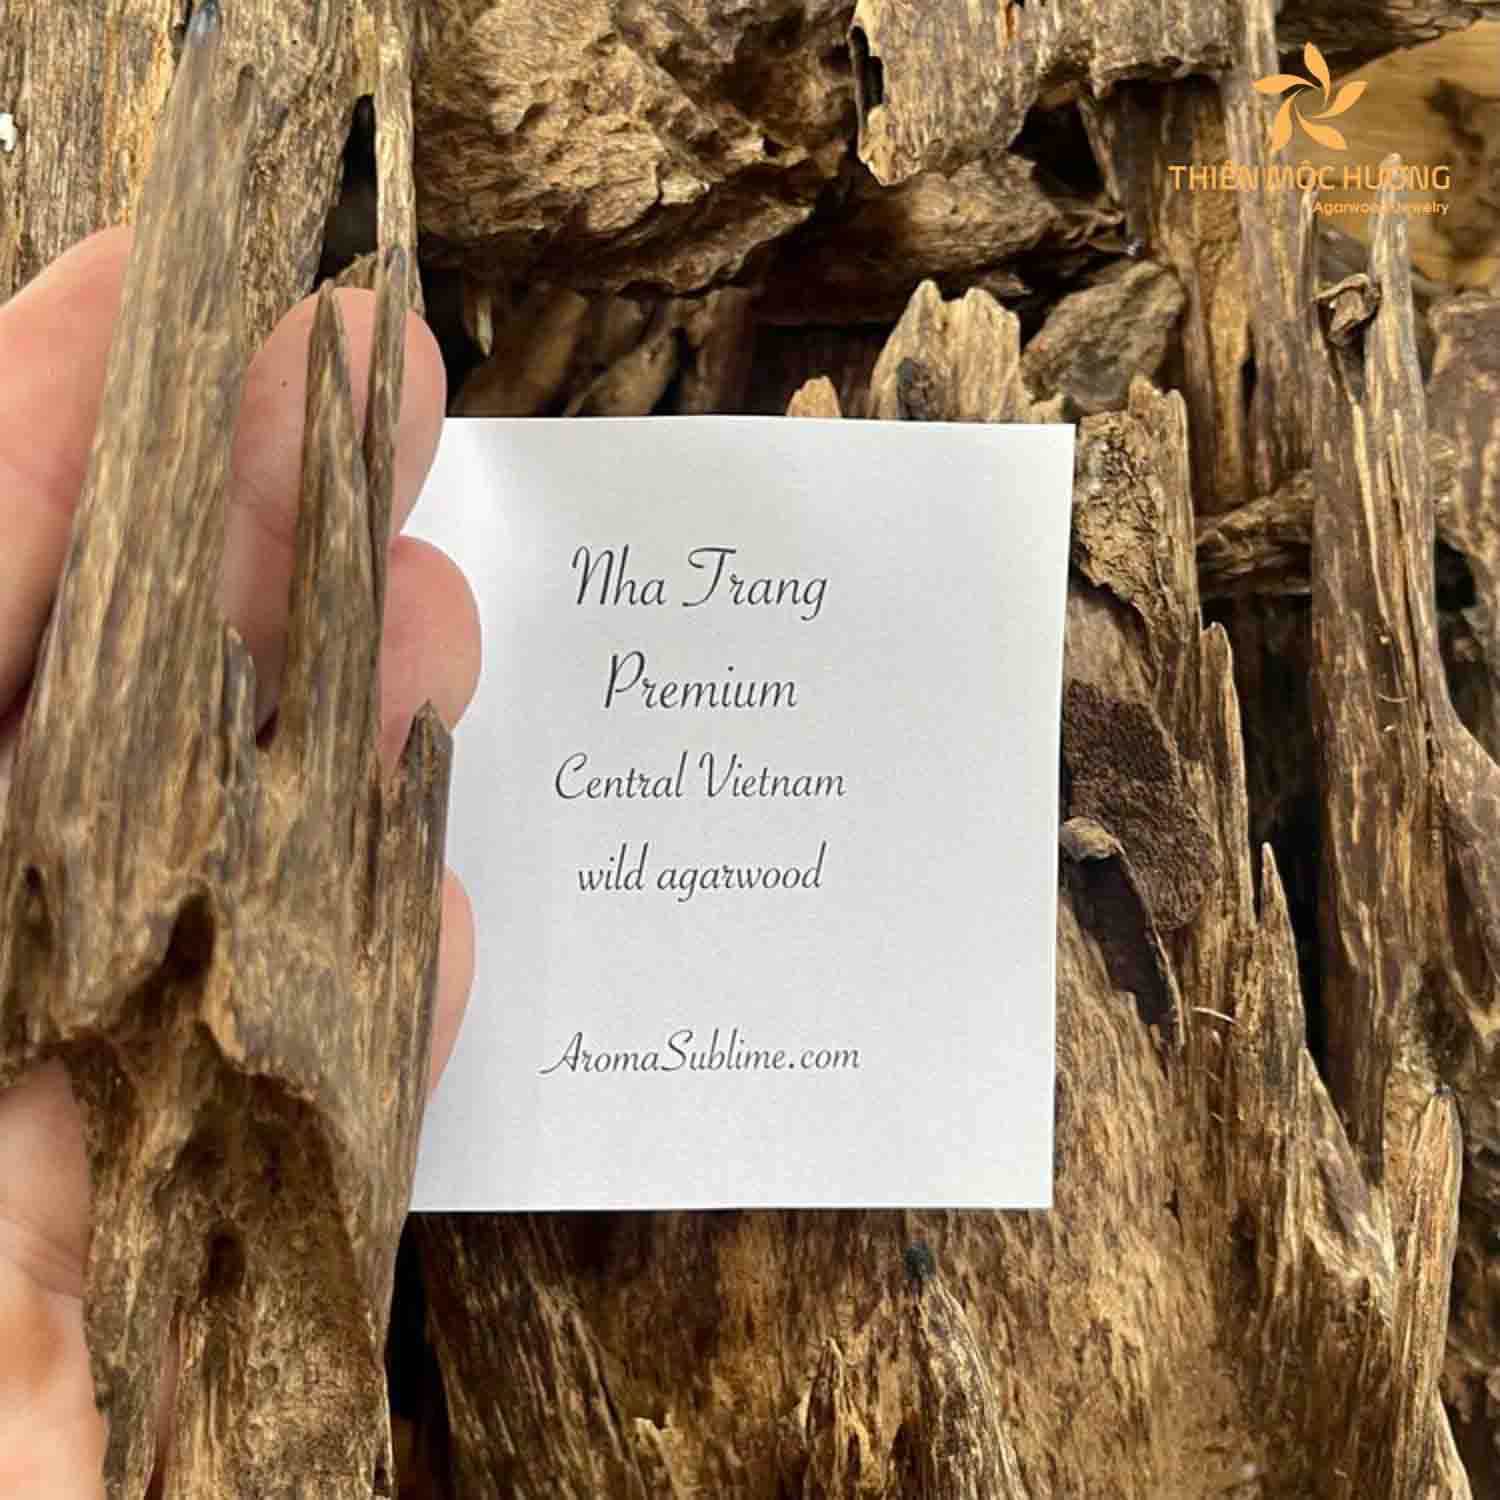 Best places to buy agarwood in the USA - Aroma Sublime